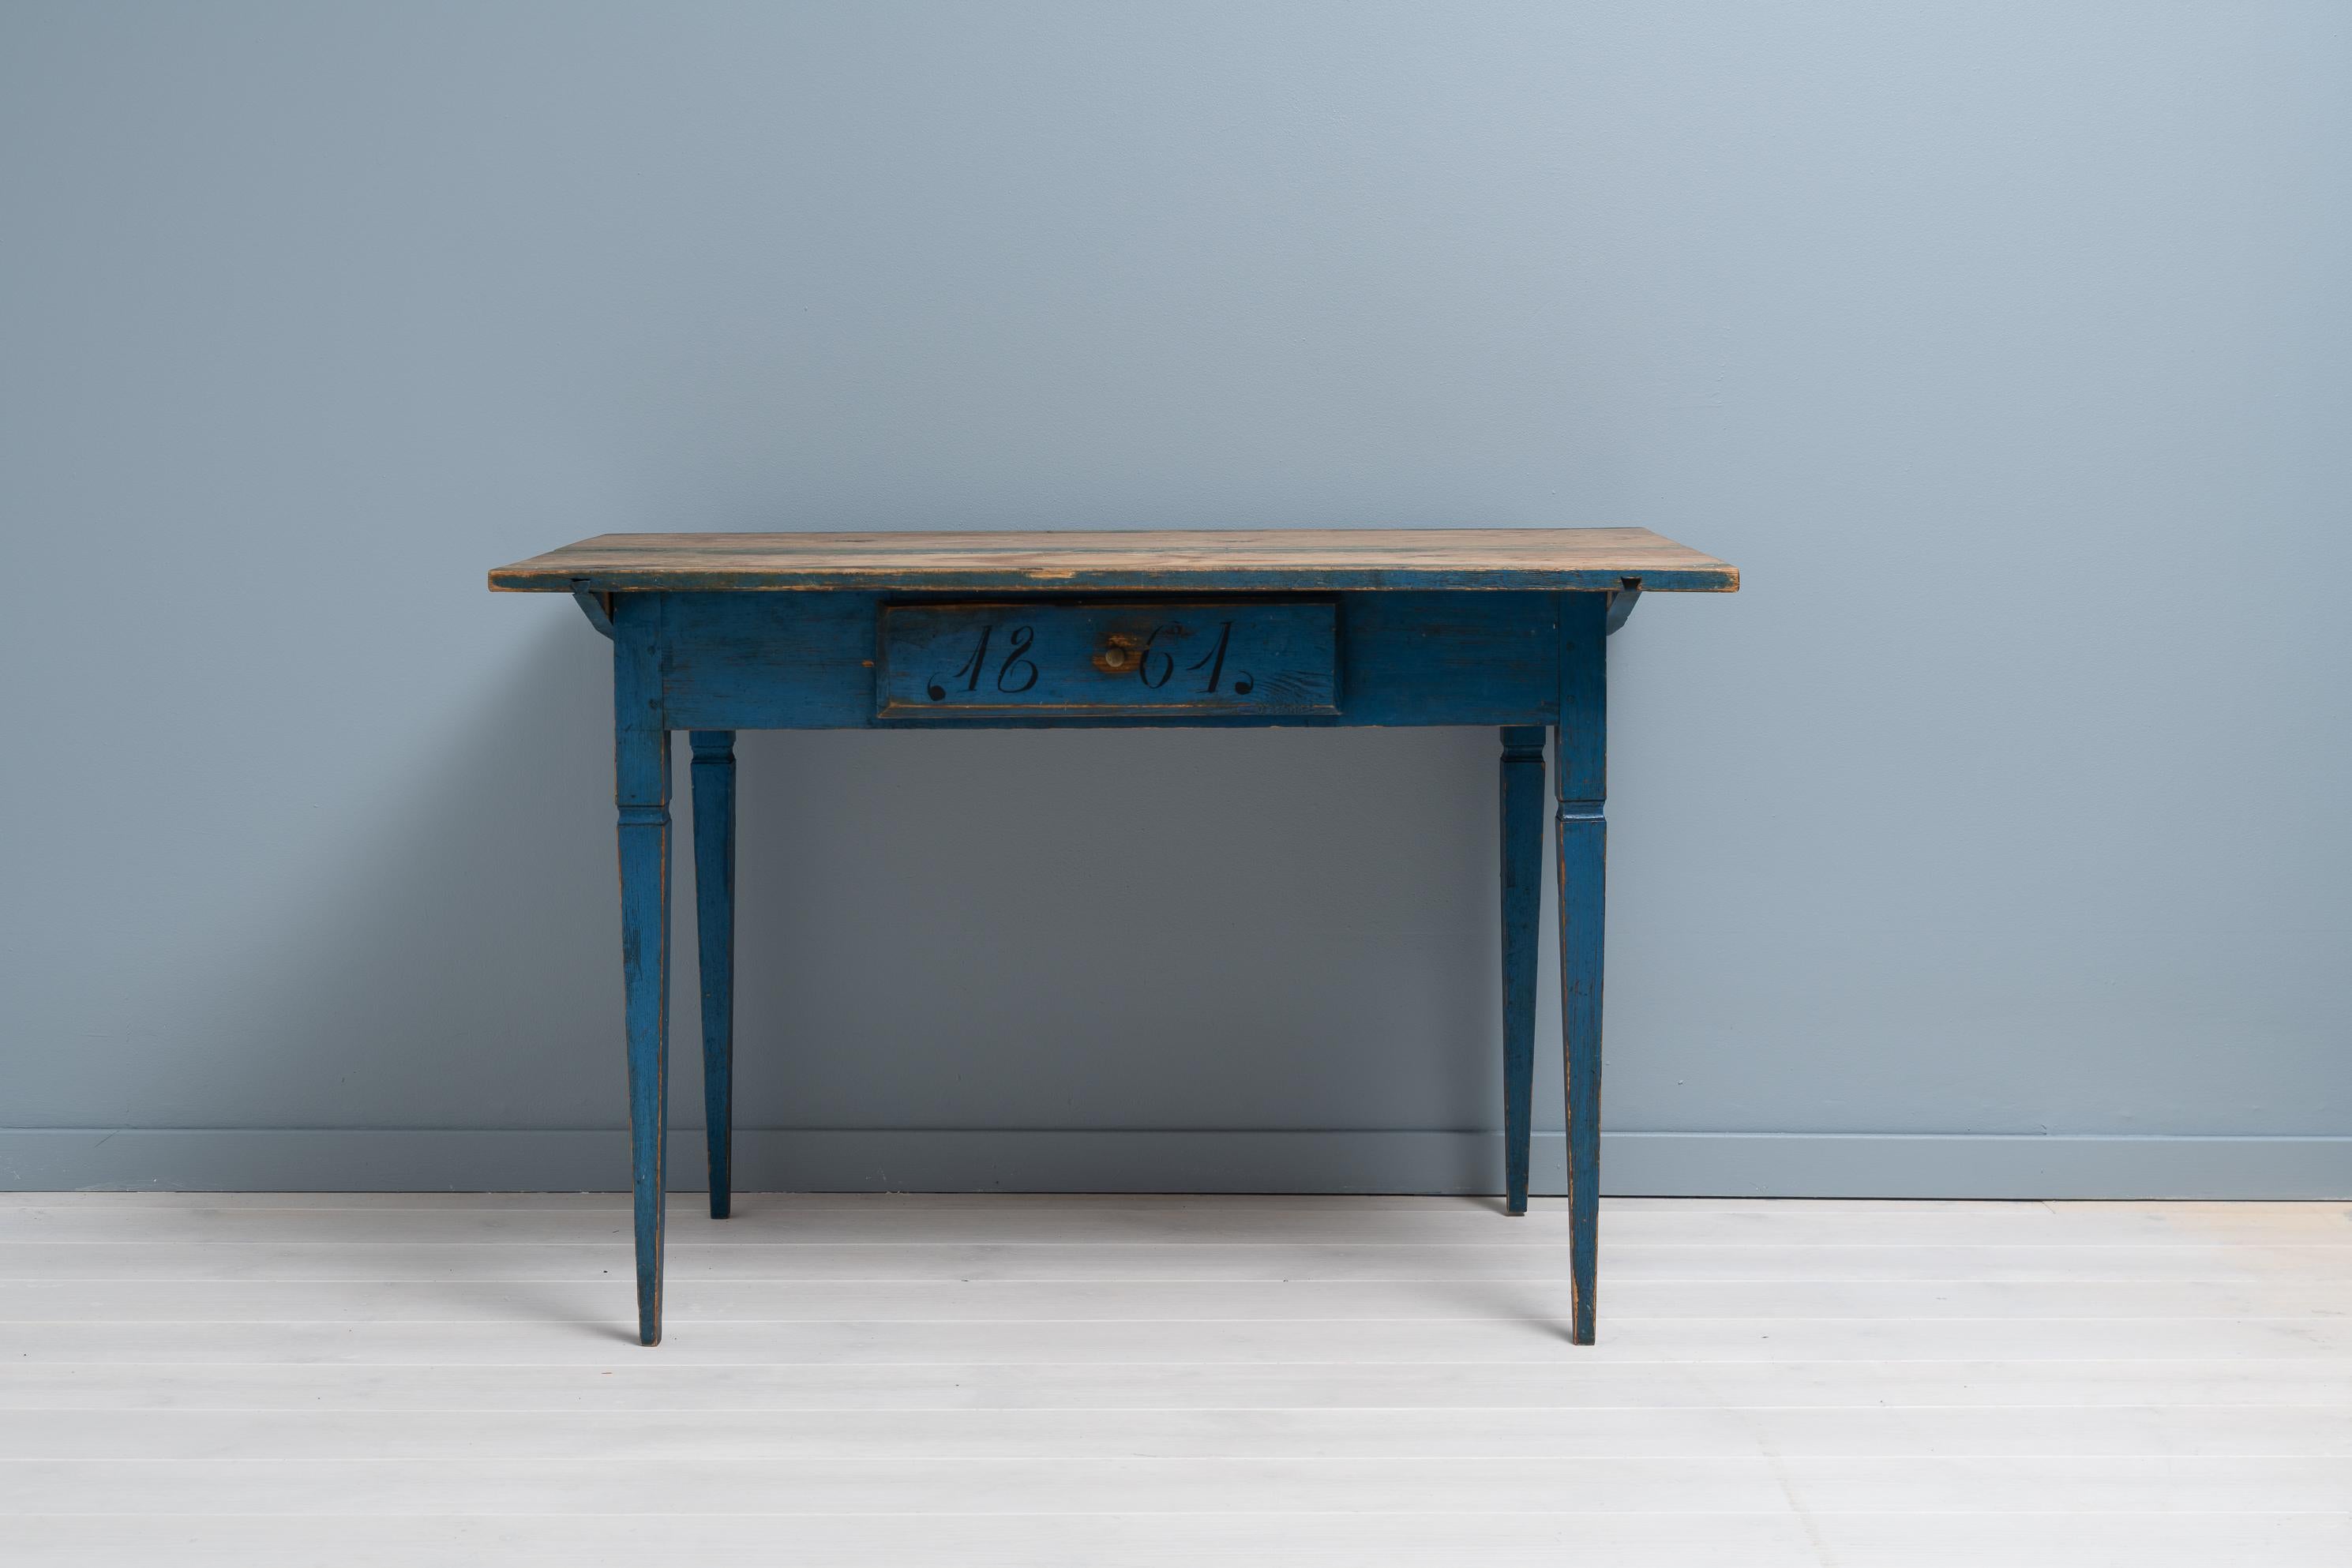 Blue gustavian style country desk in pine from Hälsingland in northern Sweden. The table is a genuine Swedish country house furniture and has the authentic patina of time. Made with a single drawer in the rim and the straight tapered legs typical to